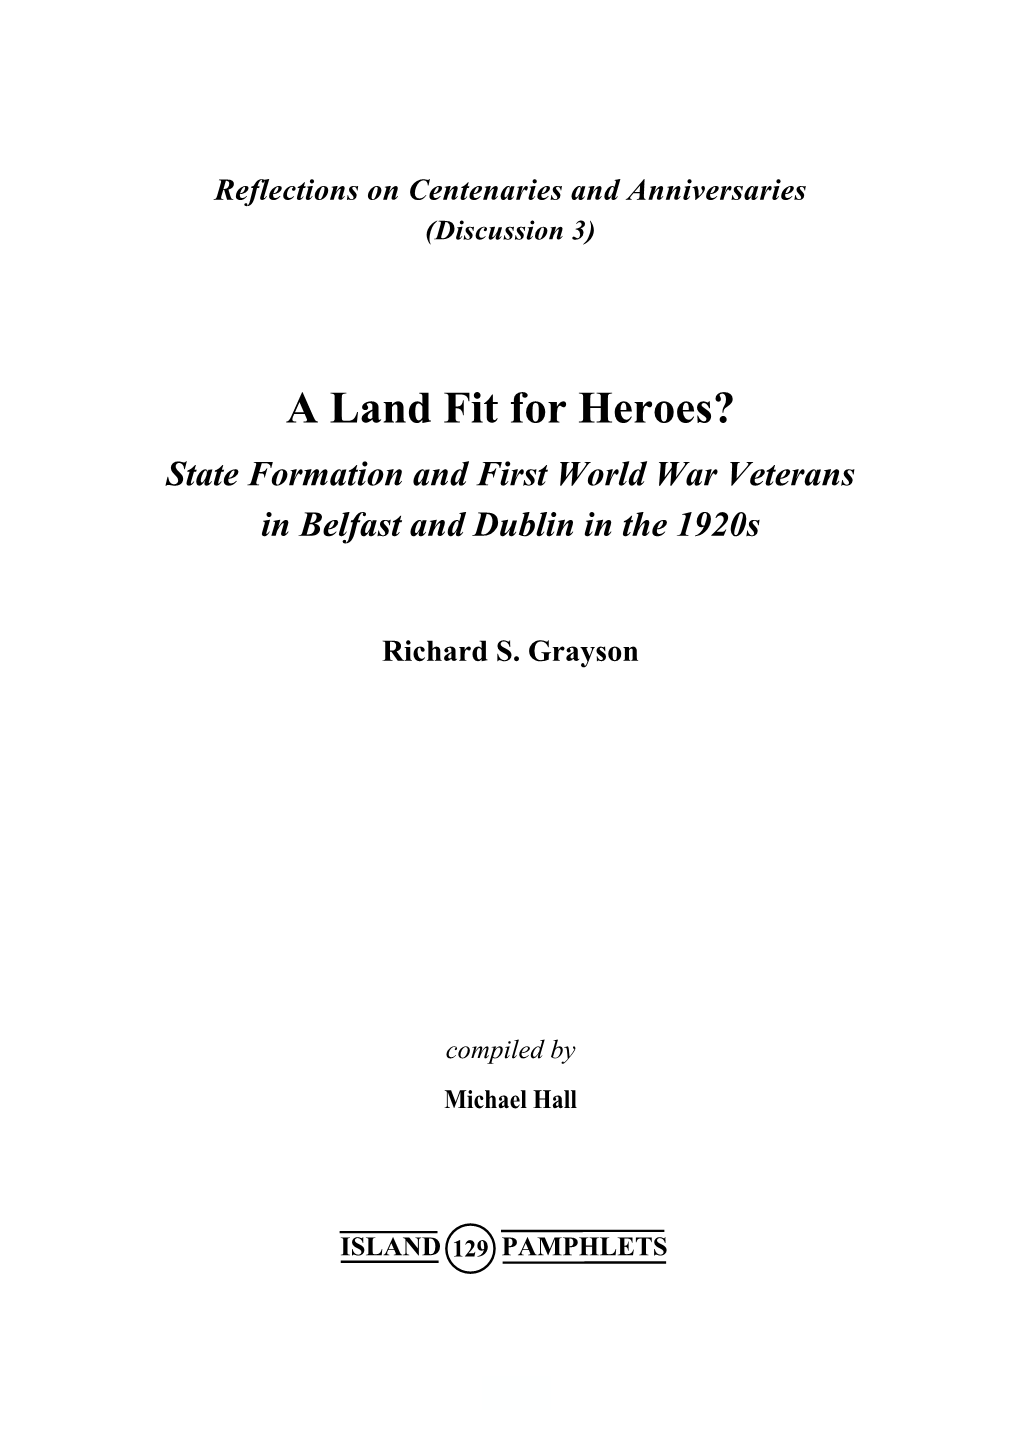 A Land Fit for Heroes? State Formation and First World War Veterans in Belfast and Dublin in the 1920S